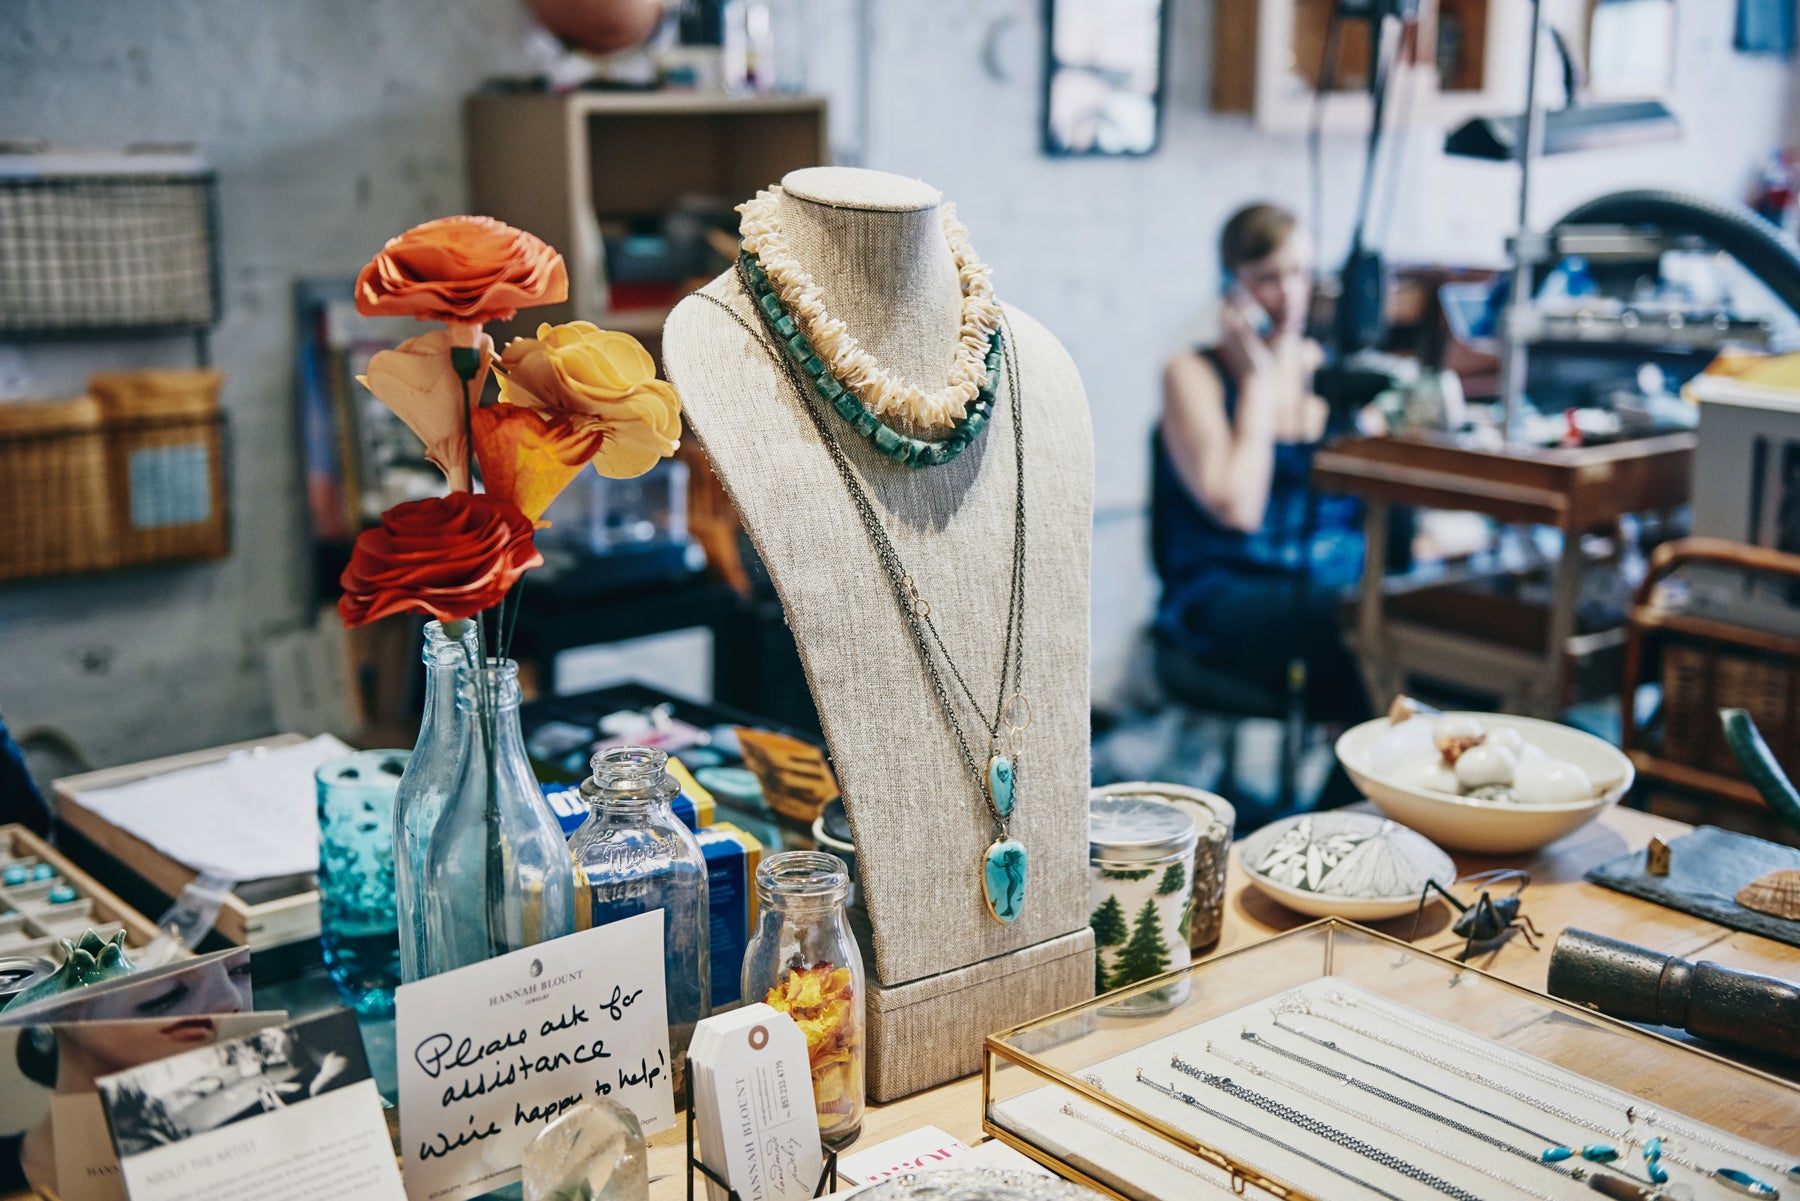 Image of a jewelry display featuring necklaces, a vase of flowers, and a handwritten note that says, “Please ask for assistance. We’re happy to help!” Hannah Blount talks on the phone in the background.